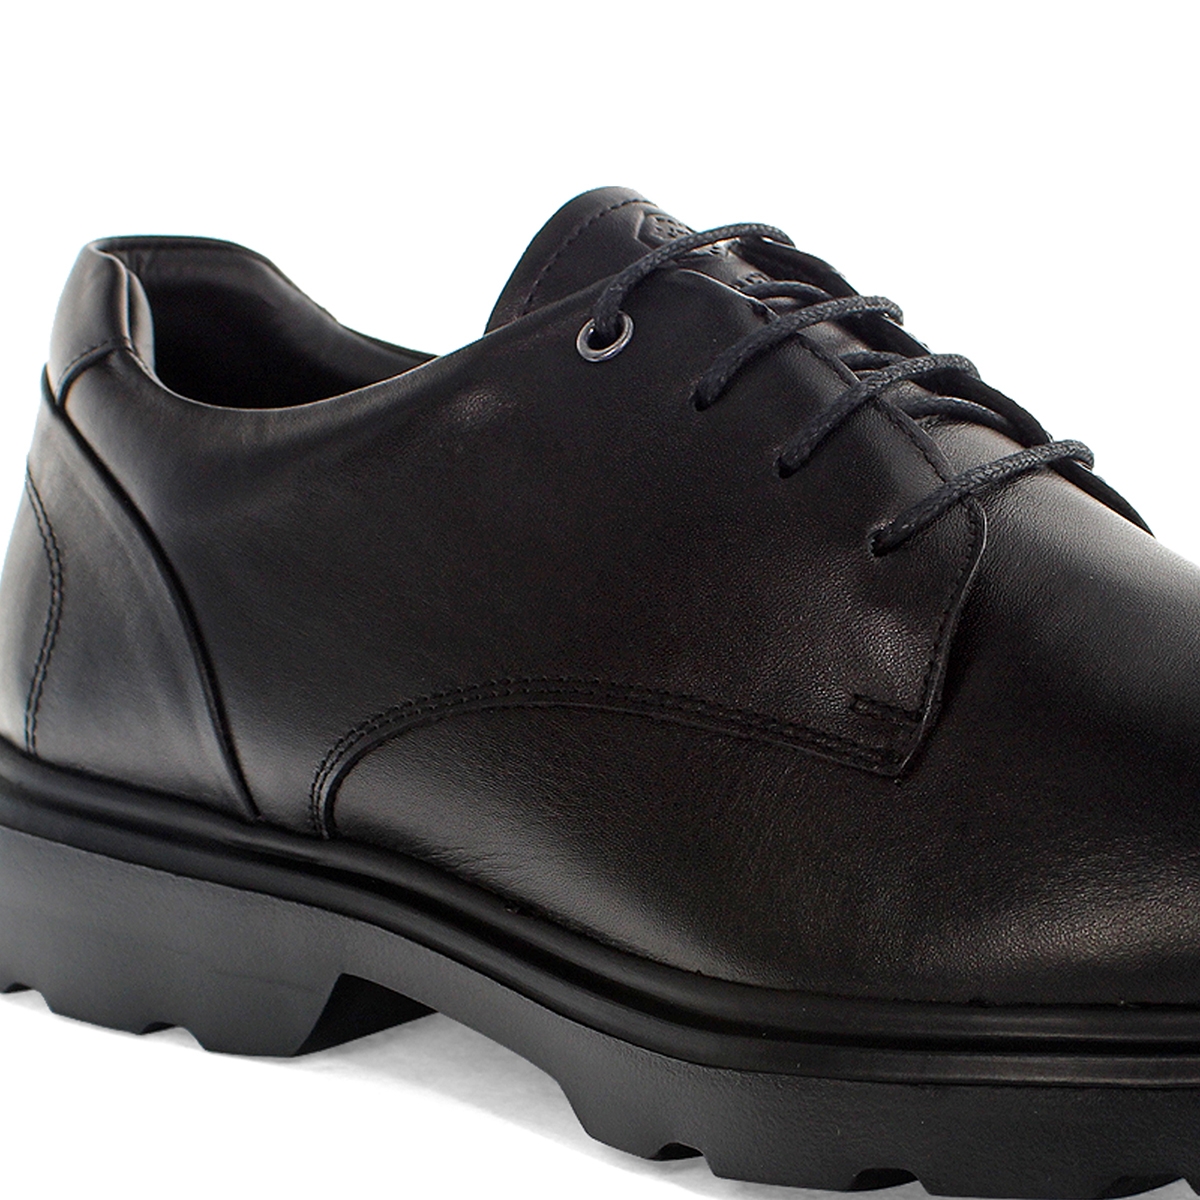 HERNEST CASUAL SHOES UOMO